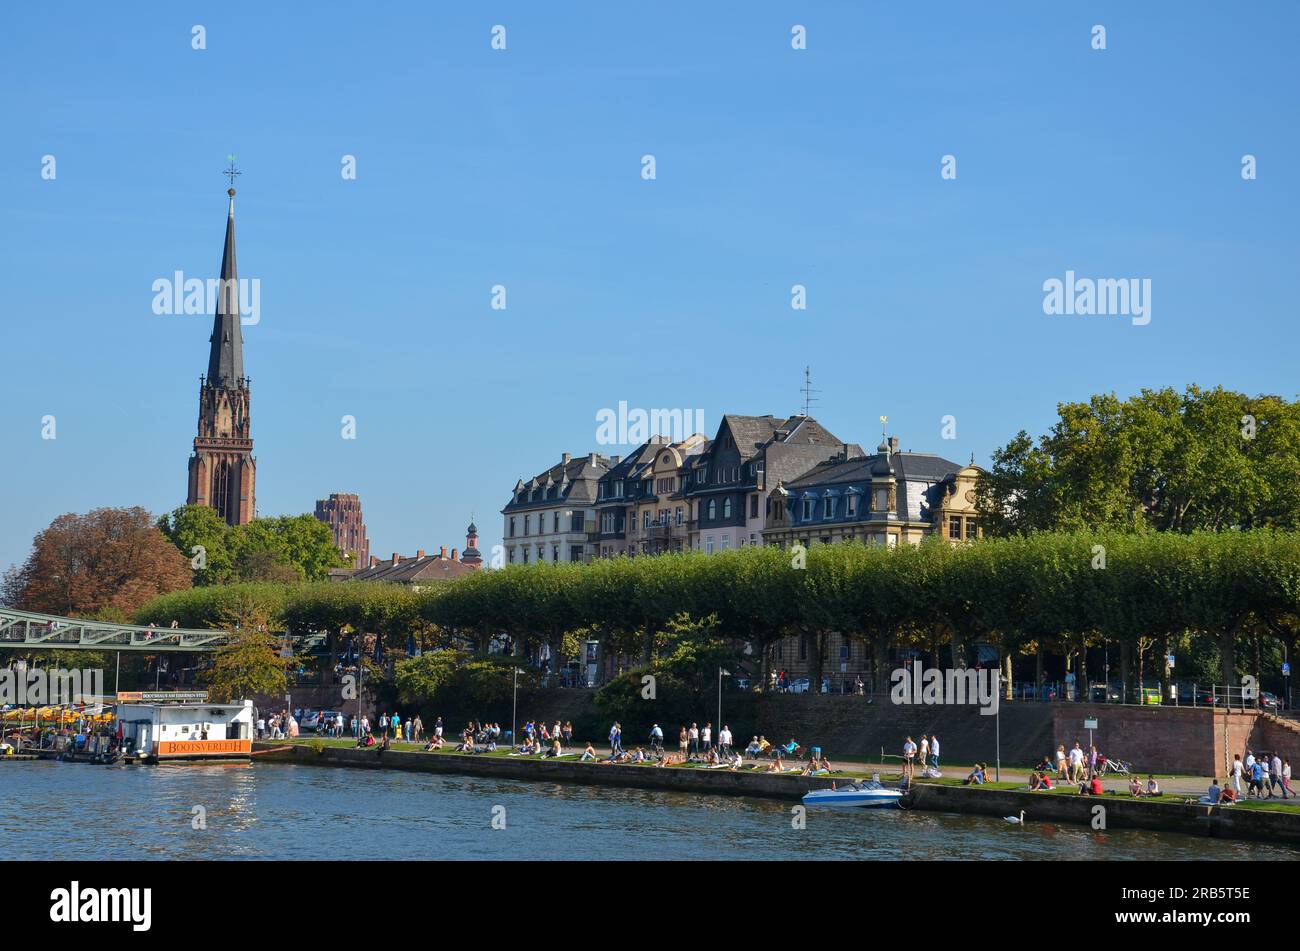 Frankfurt, Germany - October 3 2011: The Main riverbank in Frankfurt with the tower of the Dreikönigskirche in the background Stock Photo